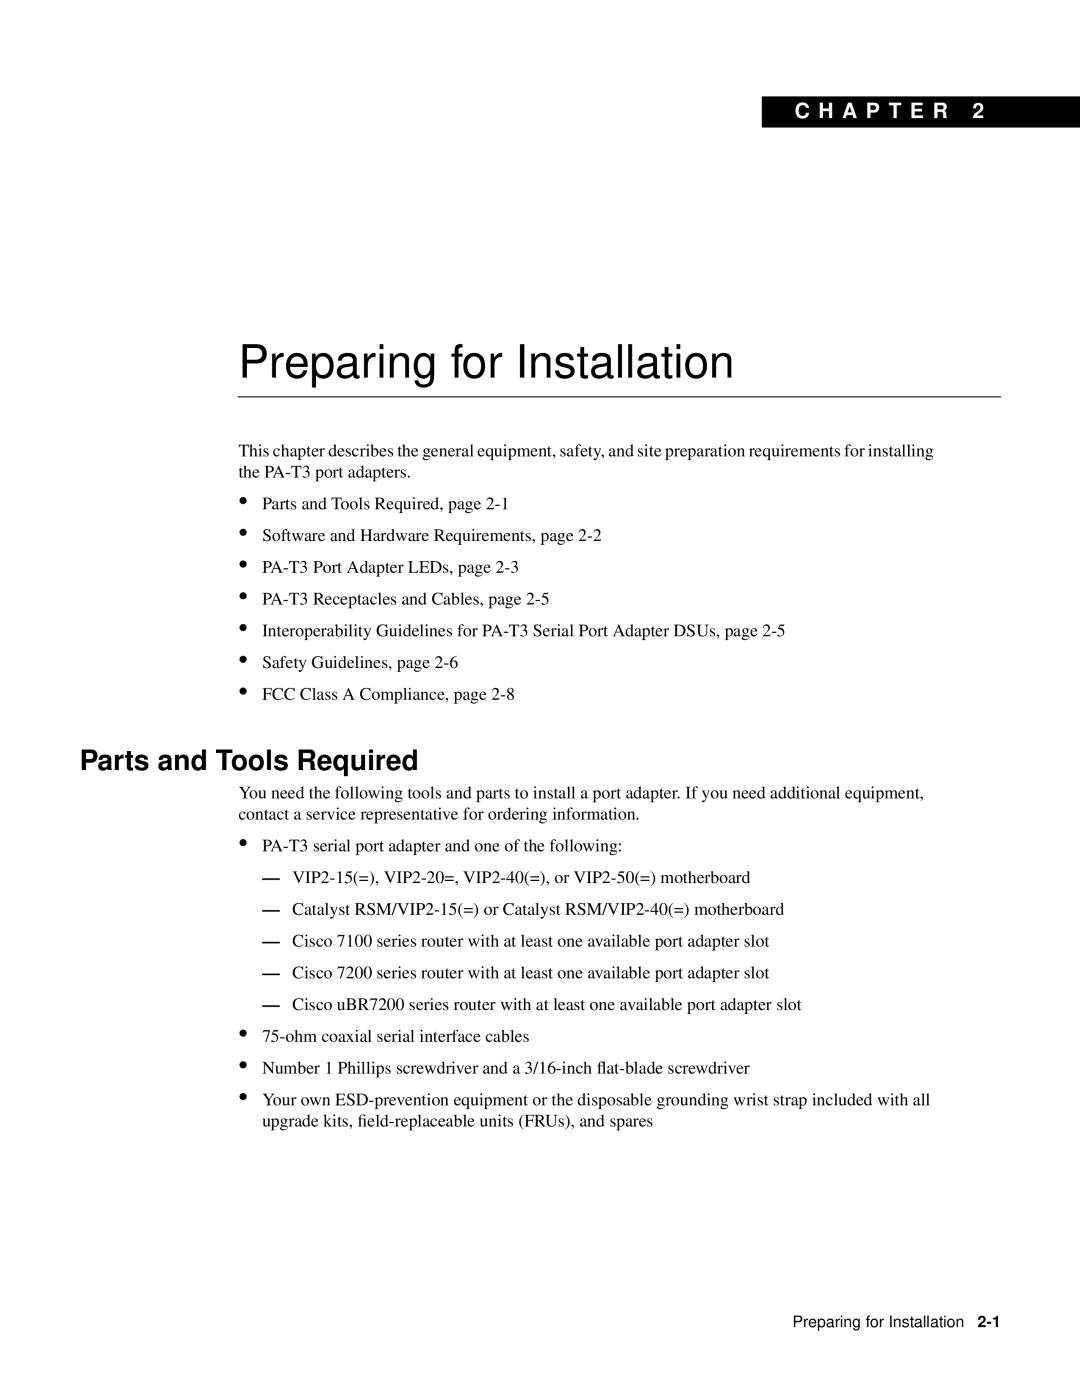 Cisco Systems PA-T3 manual Preparing for Installation, Parts and Tools Required, C H A P T E R 